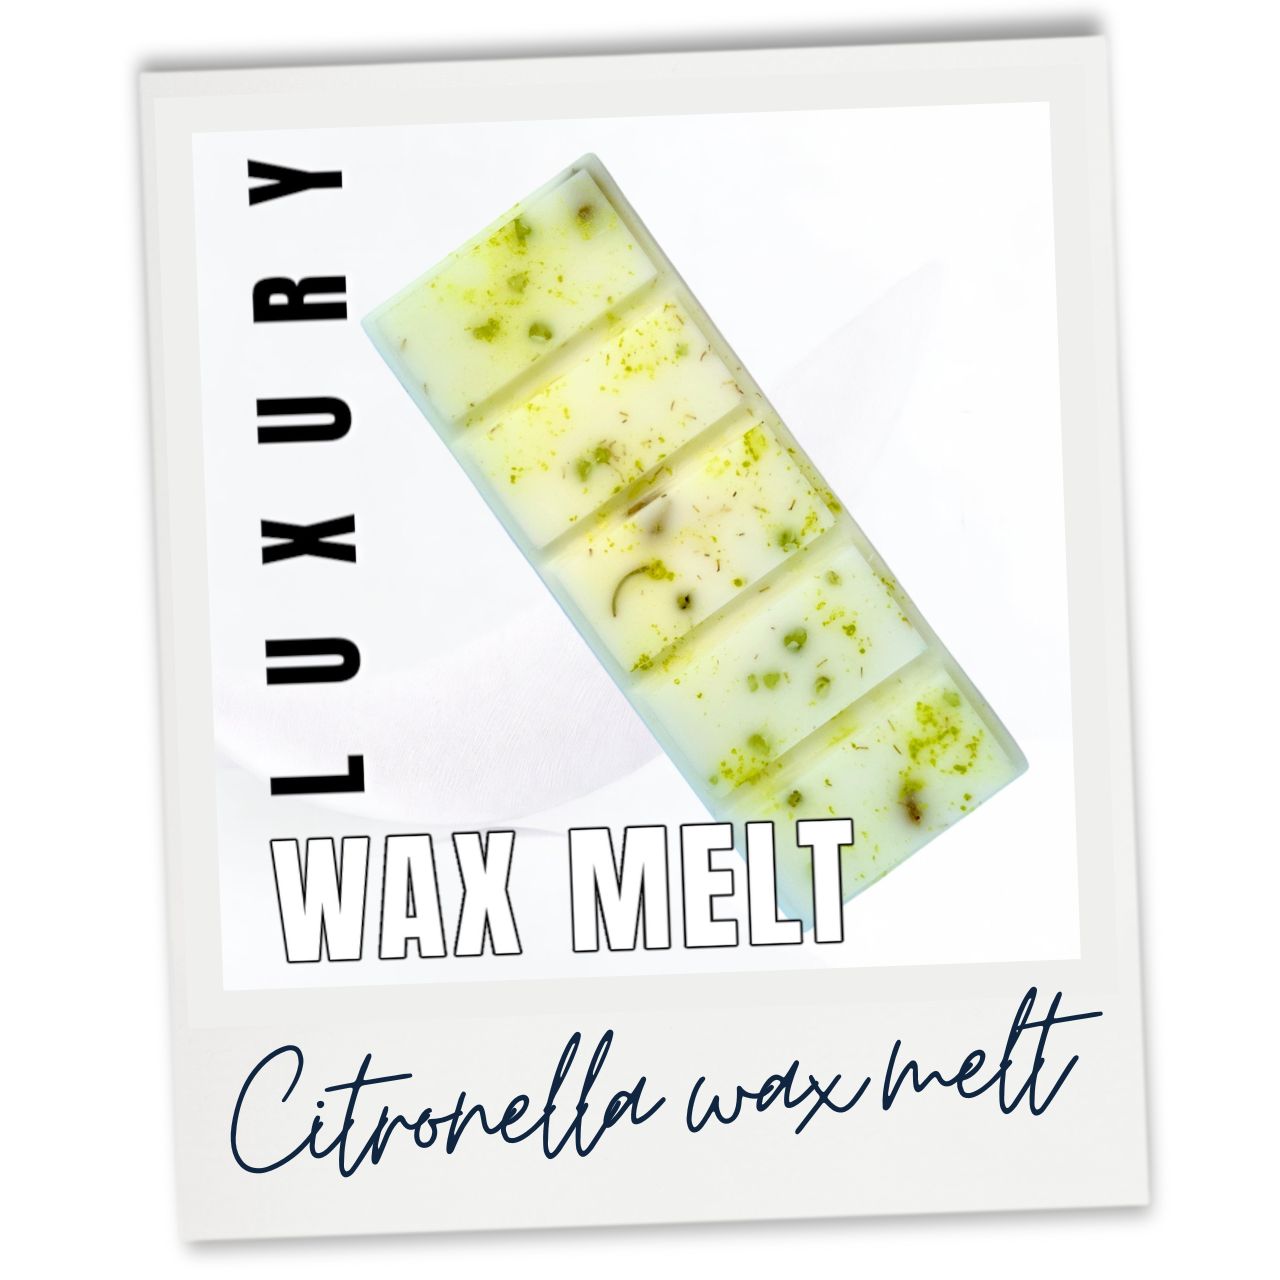 Our Citronella Wax Melts. Perfect for outdoor living this summer